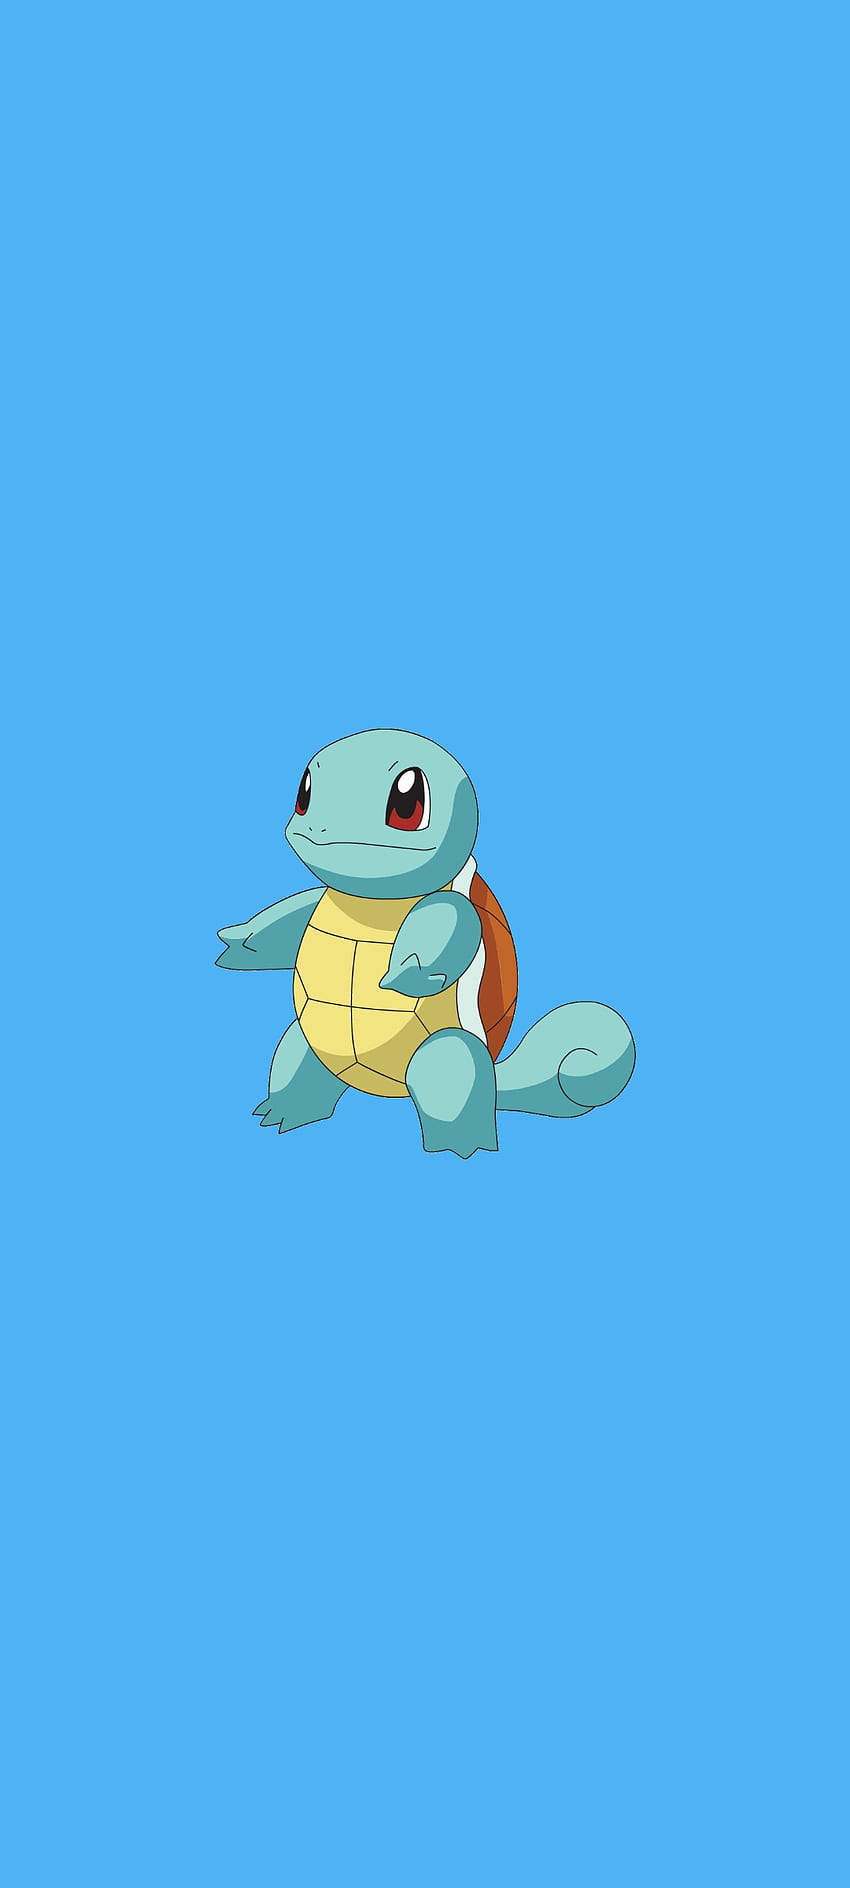 Pokemon Journeys just confirmed the return of Squirtle and more ages old  characters